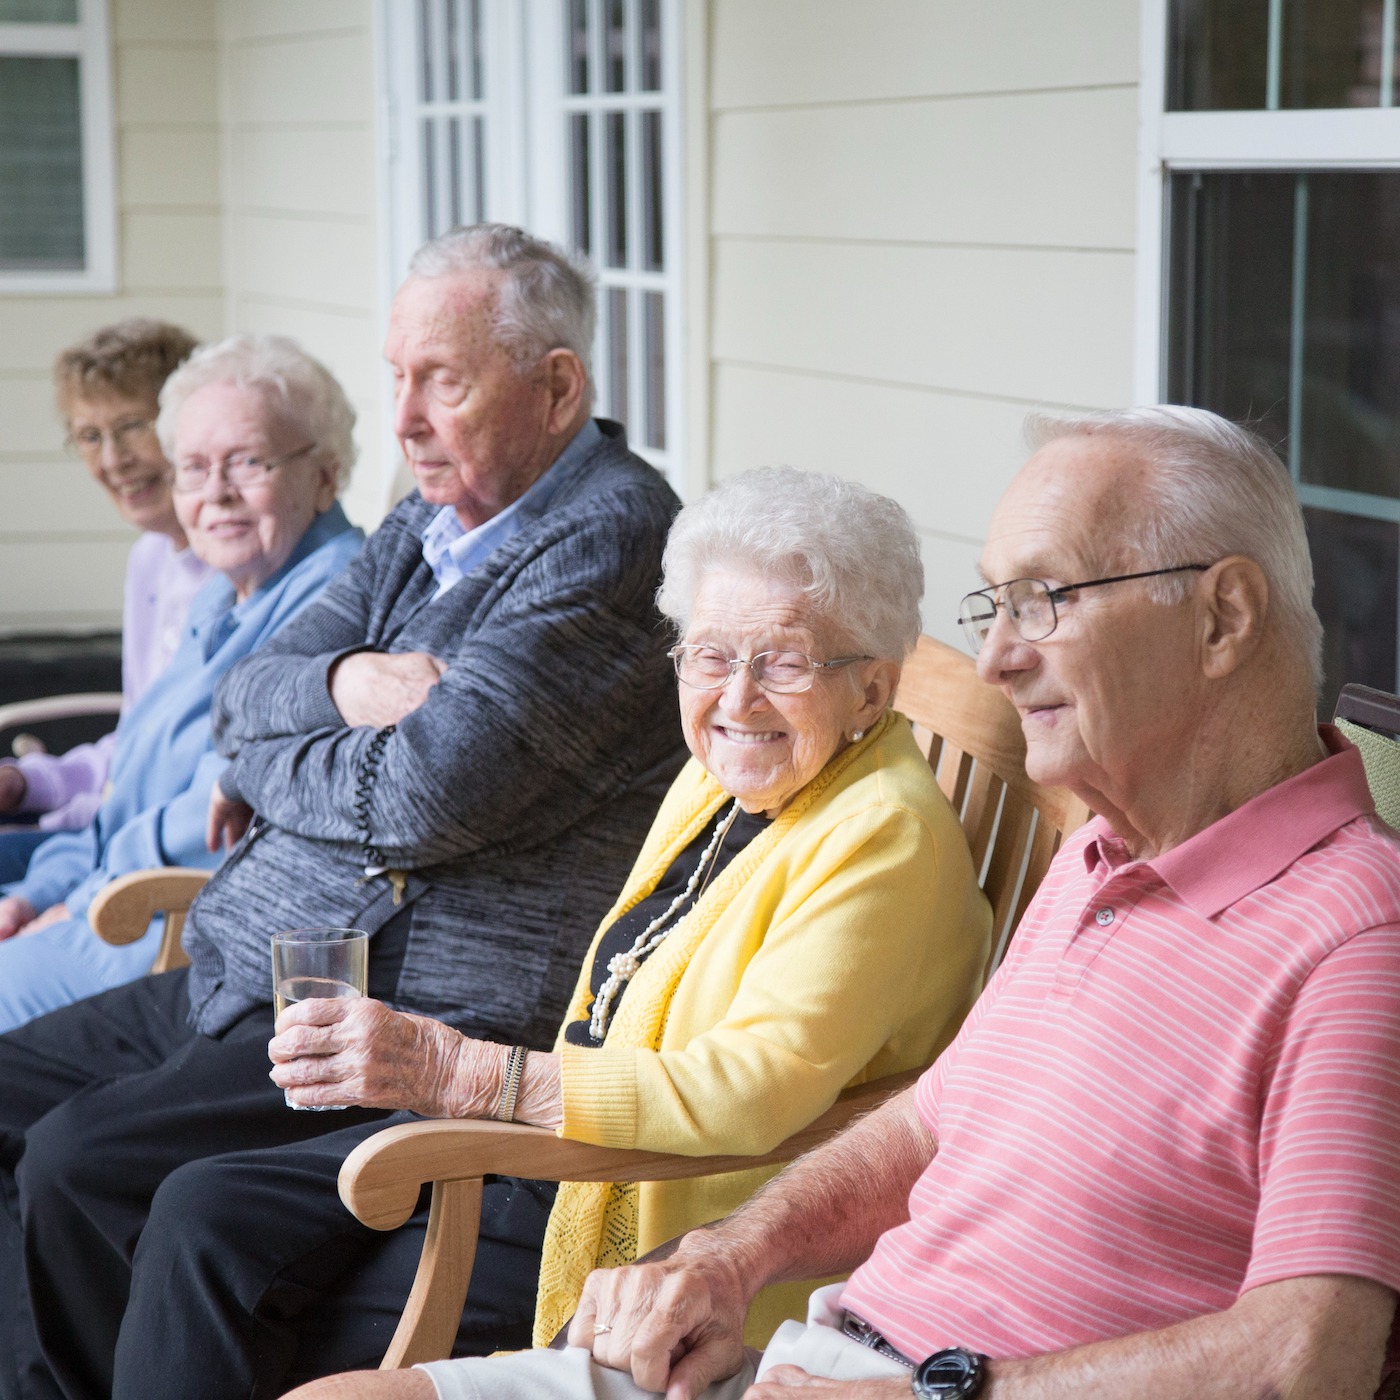 Group of residents sitting together on front porch